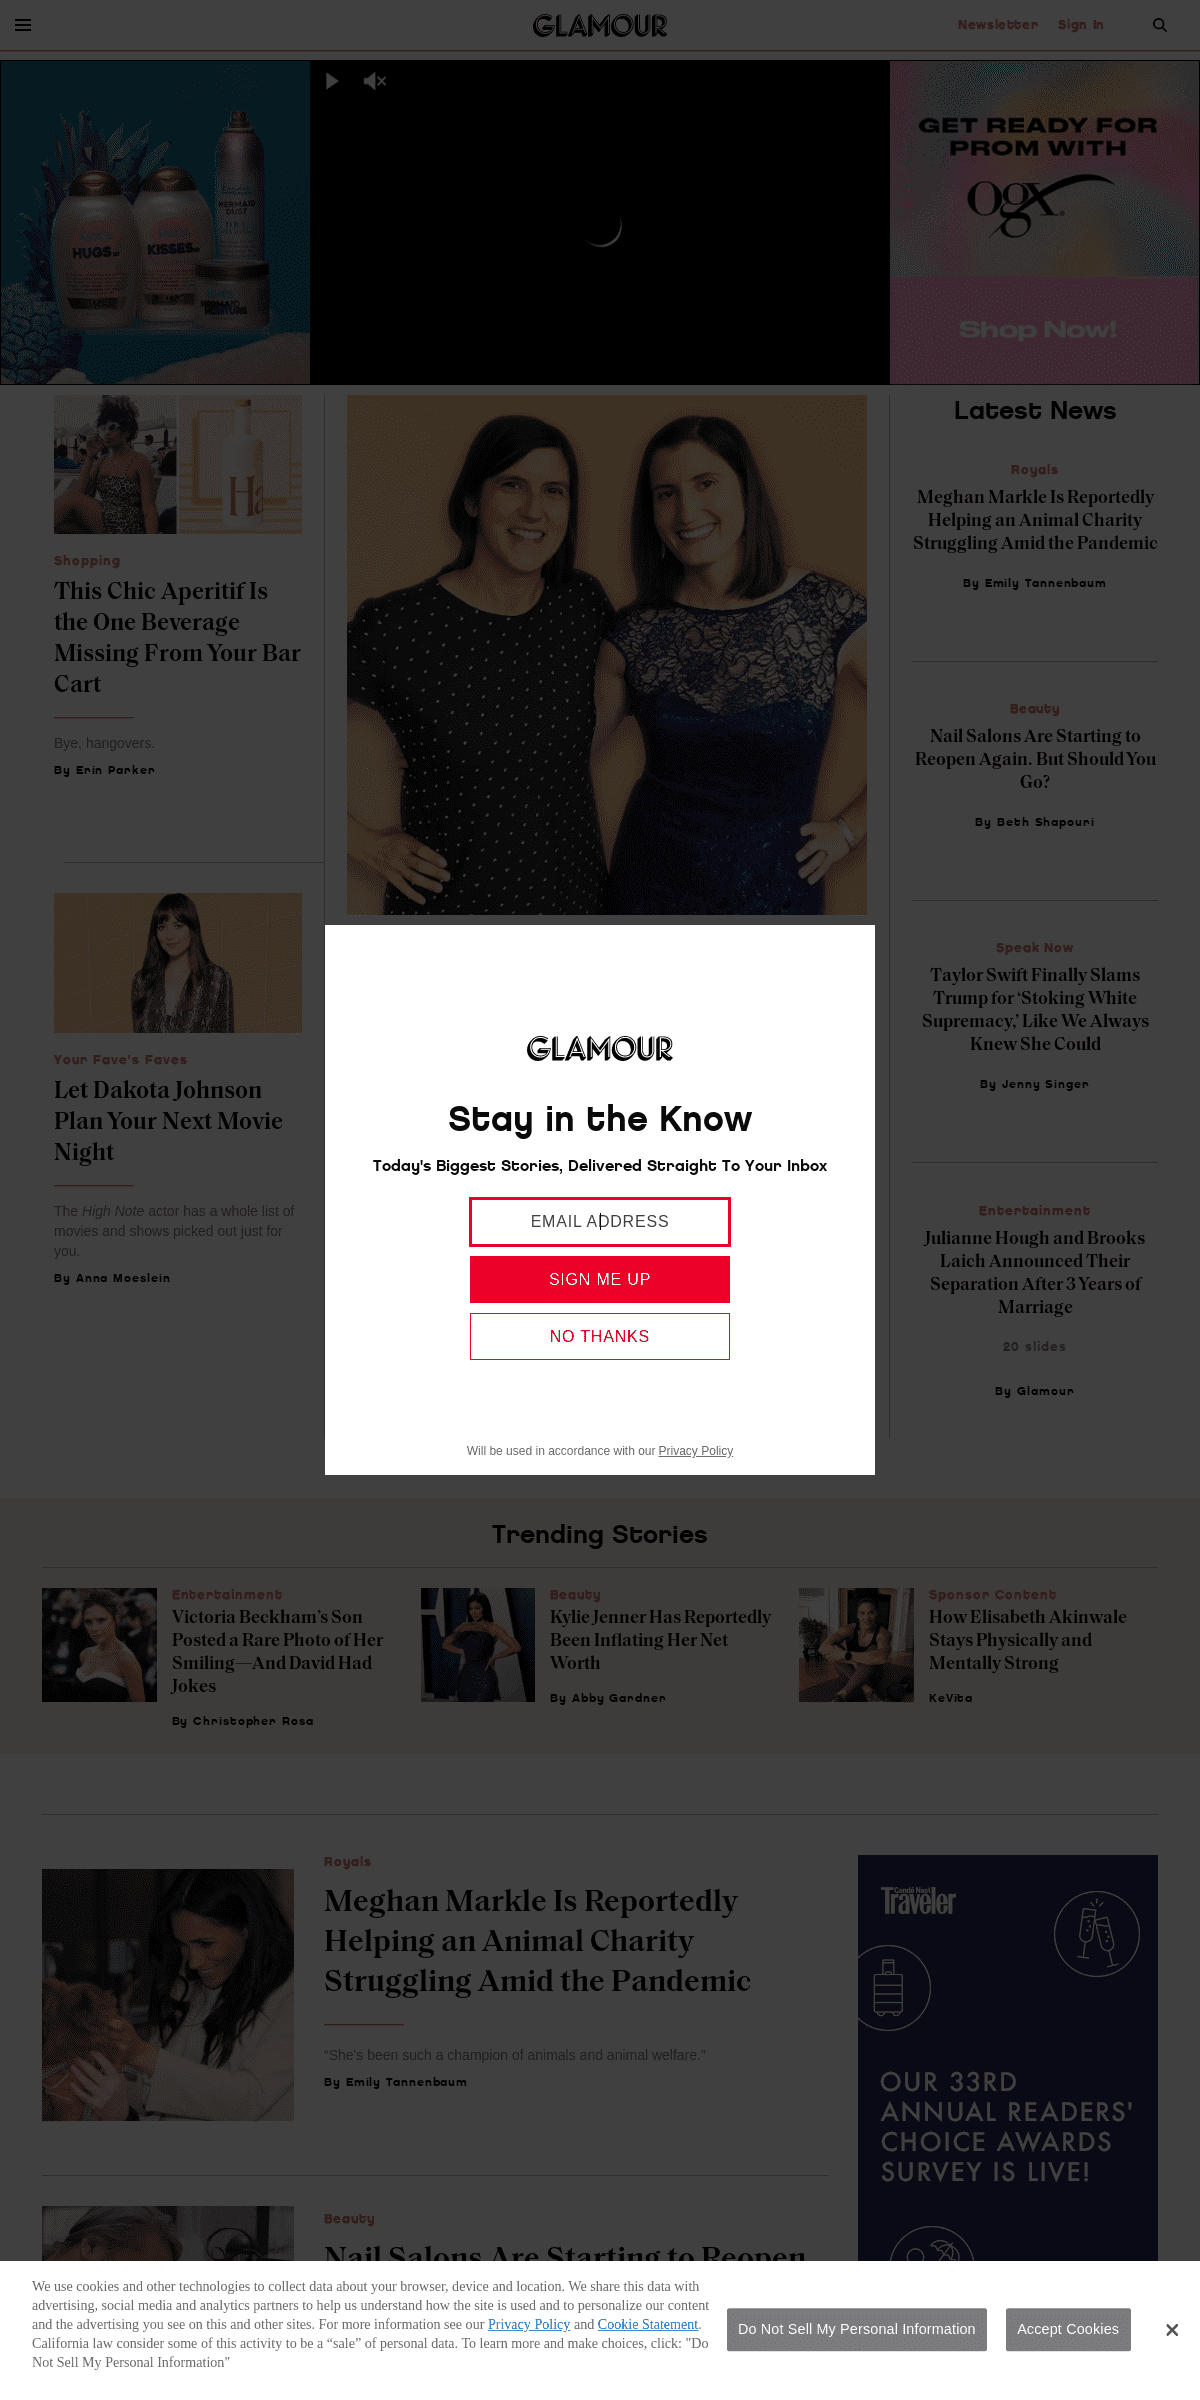 A complete backup of glamour.com